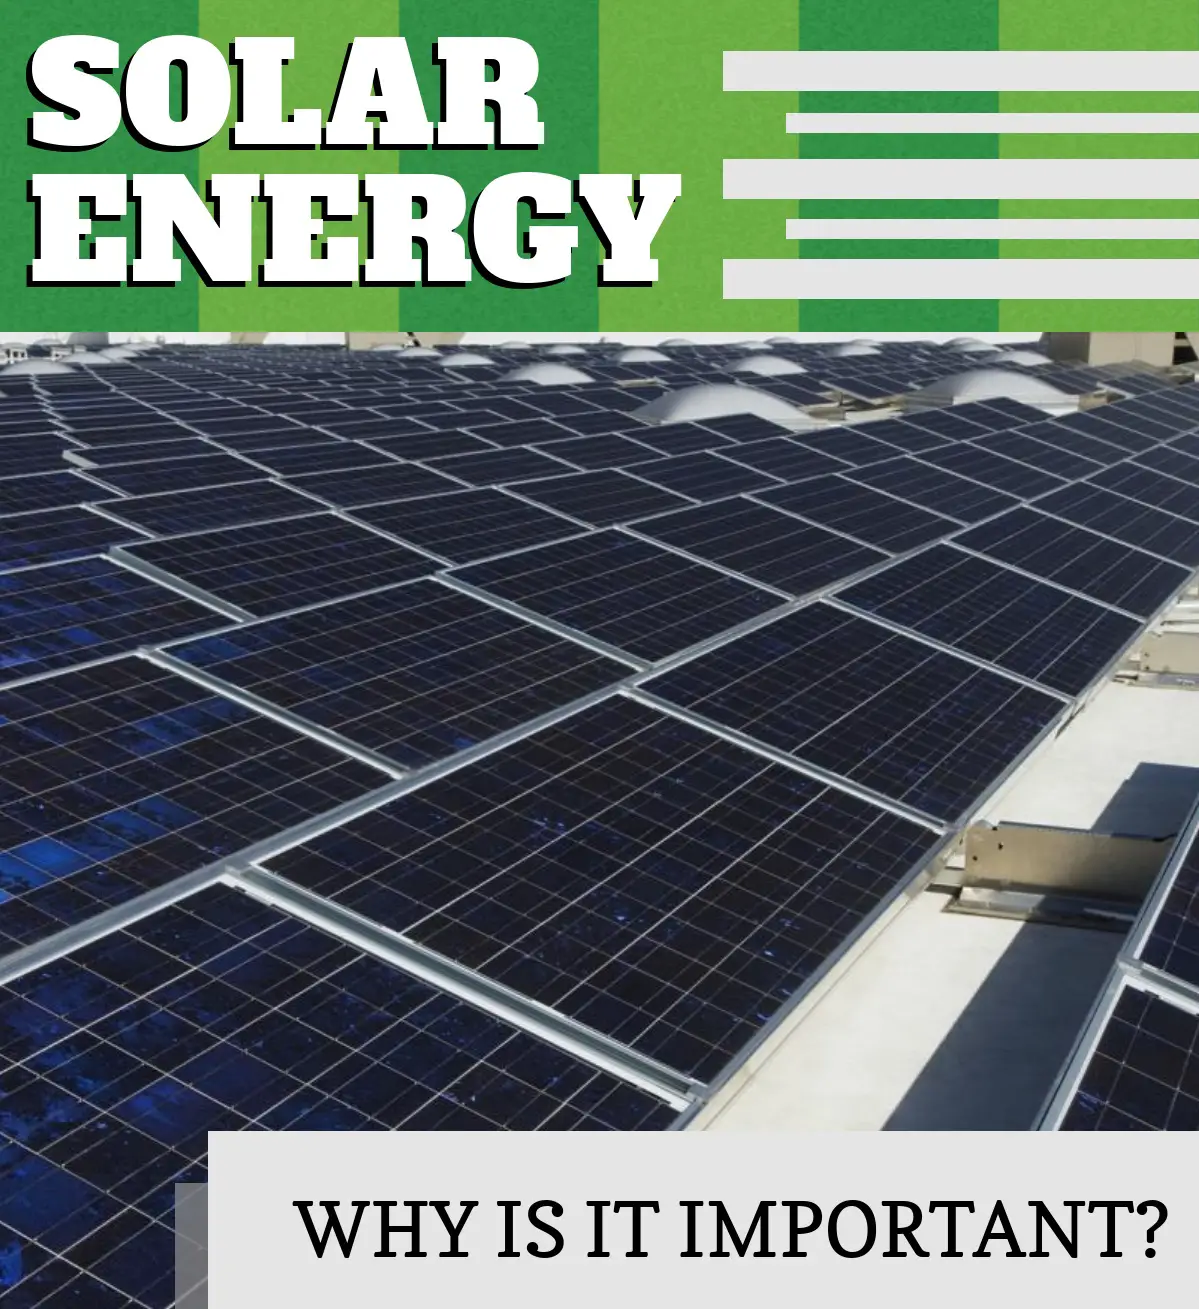 Why is Solar Power Renewable Energy Important?